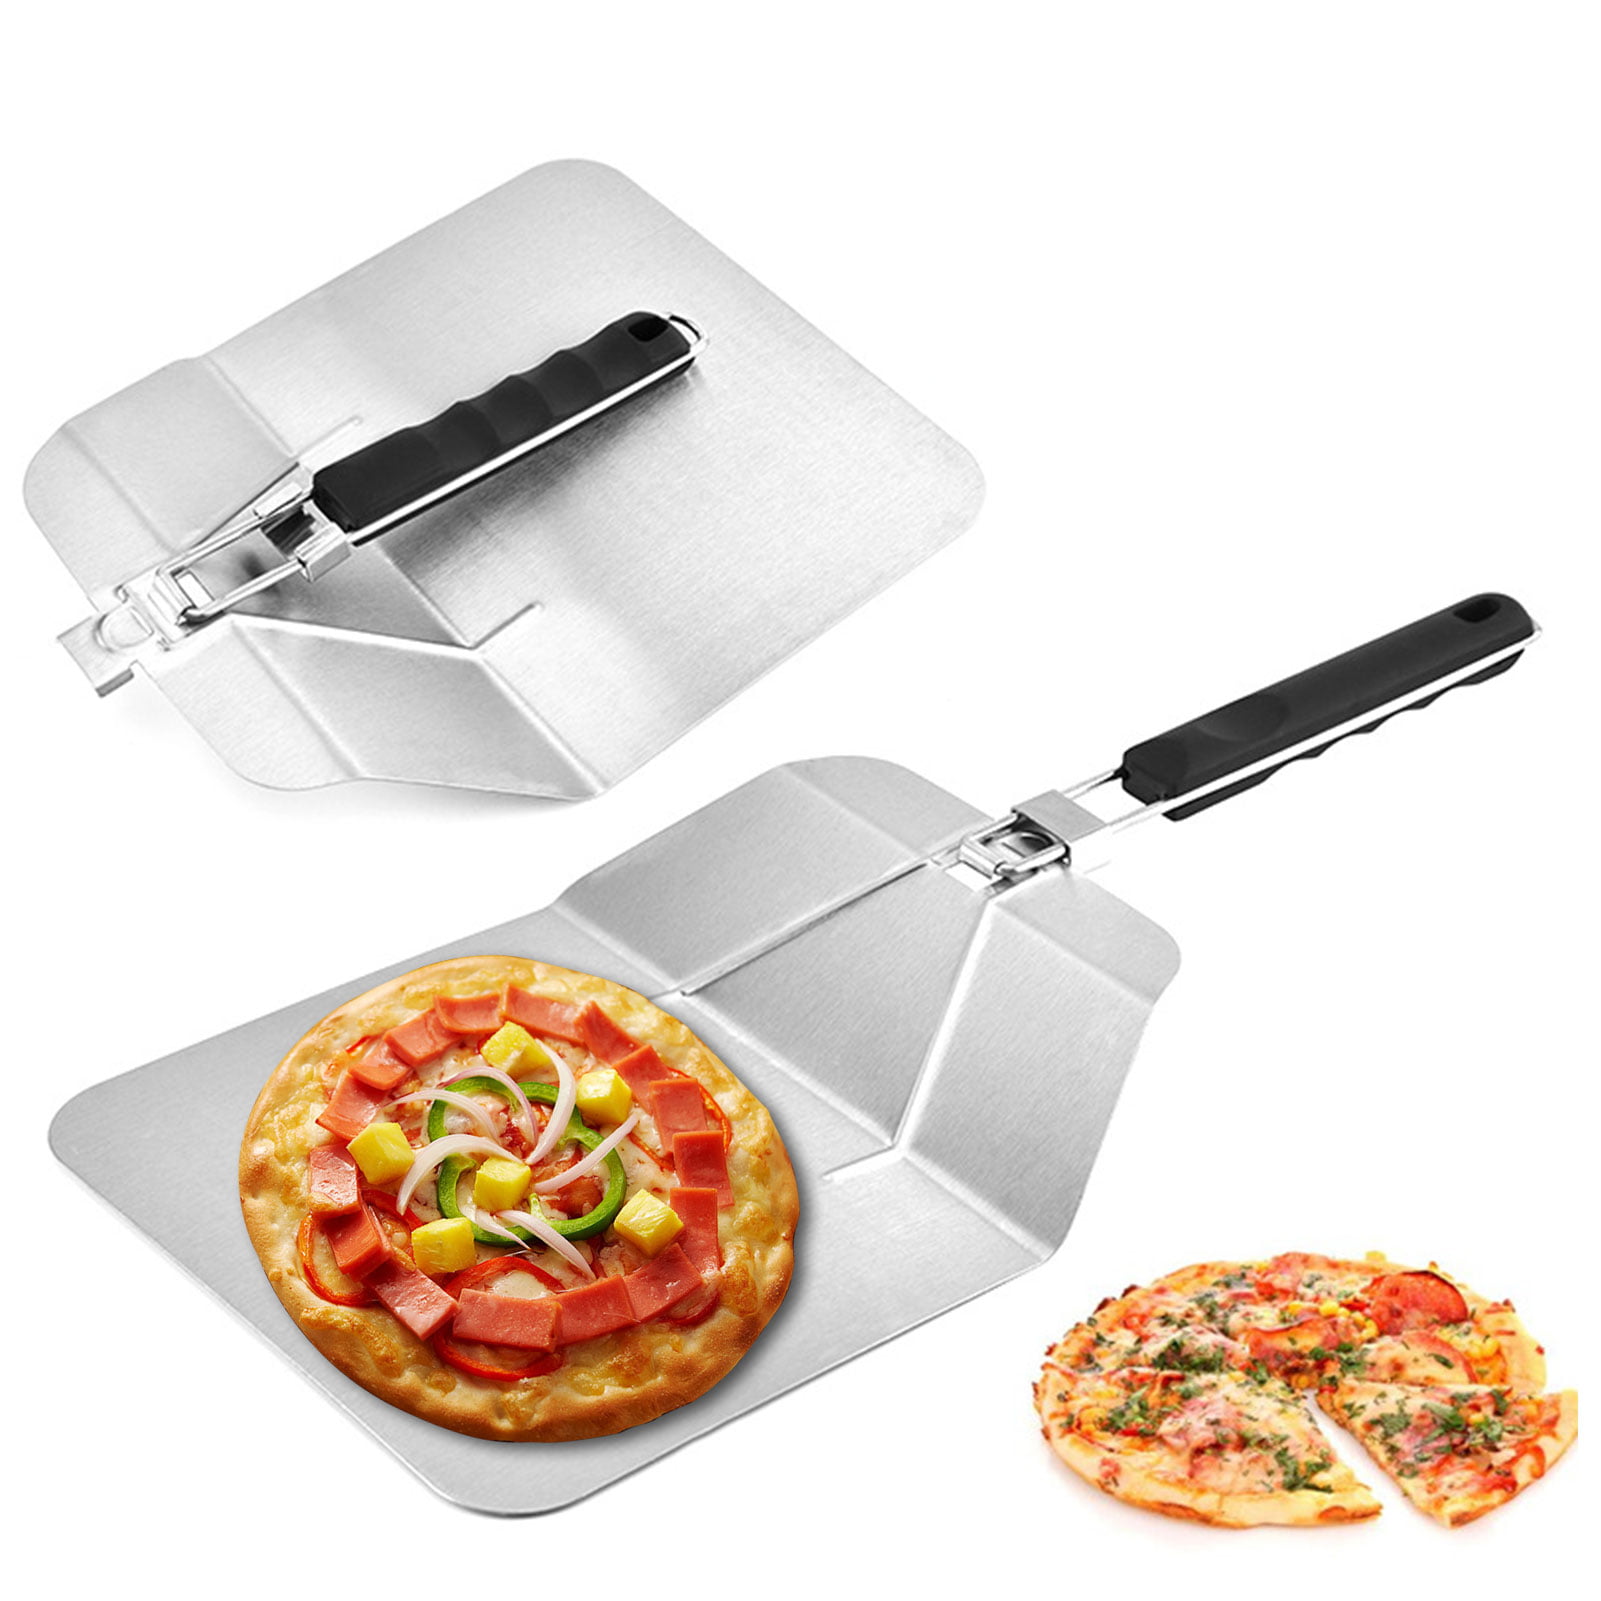 Stainless Steel Pizza Peel With Folding Handle for Baking Homemade Pizza Bread Easy To Storage Practical Kitchen Bakery Oven Accessories 